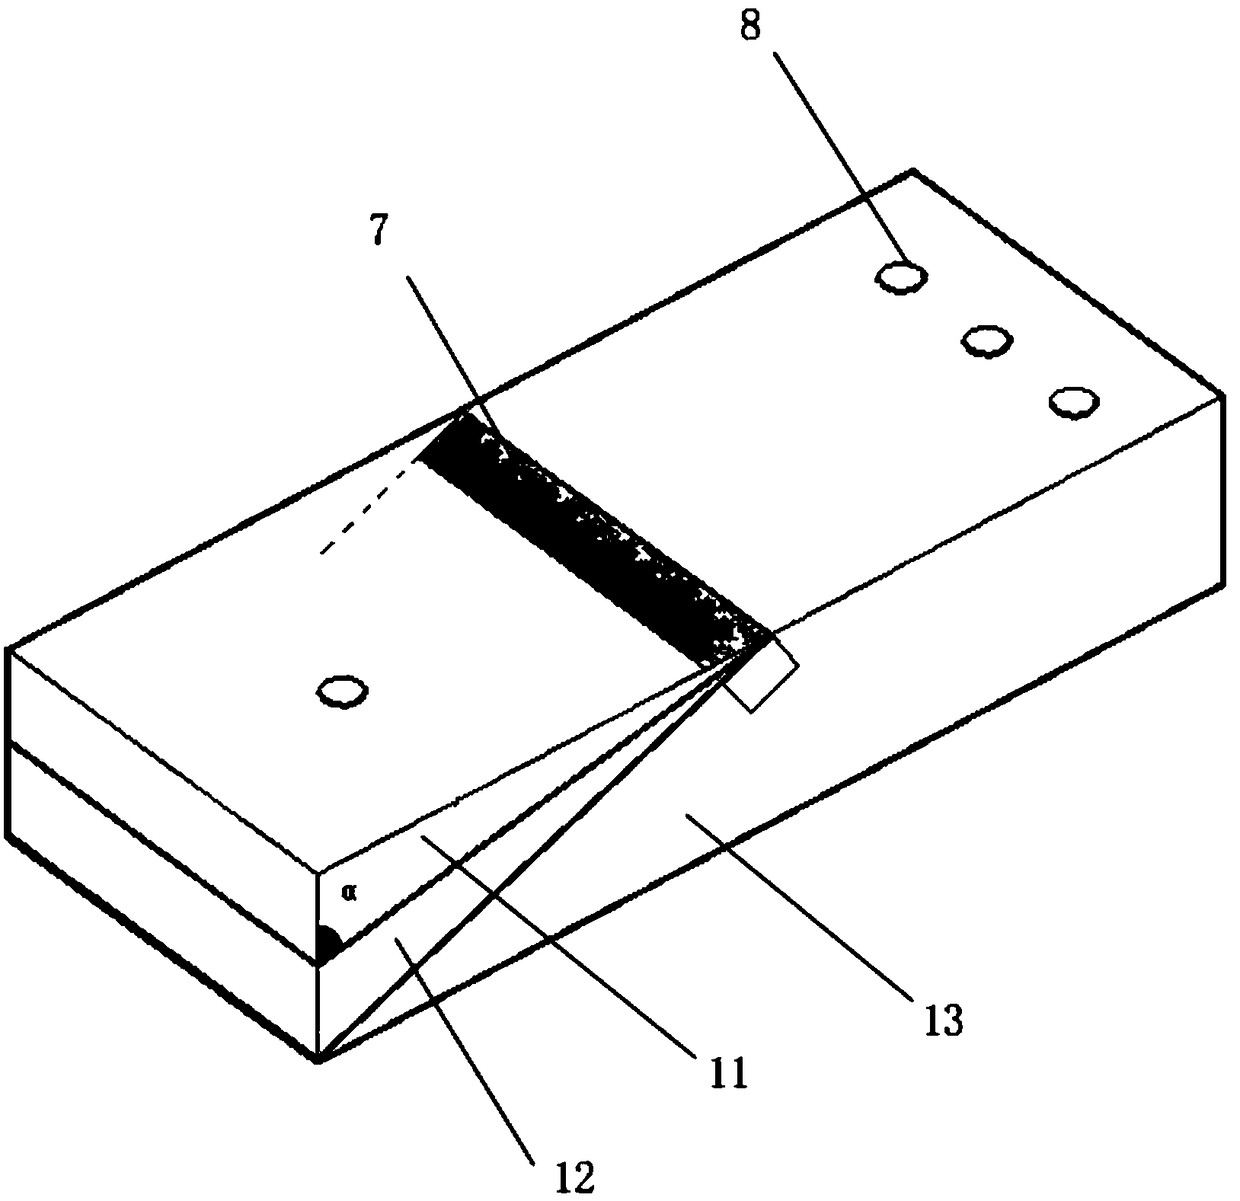 An auxiliary device for general X-ray photographing body position in medical imaging